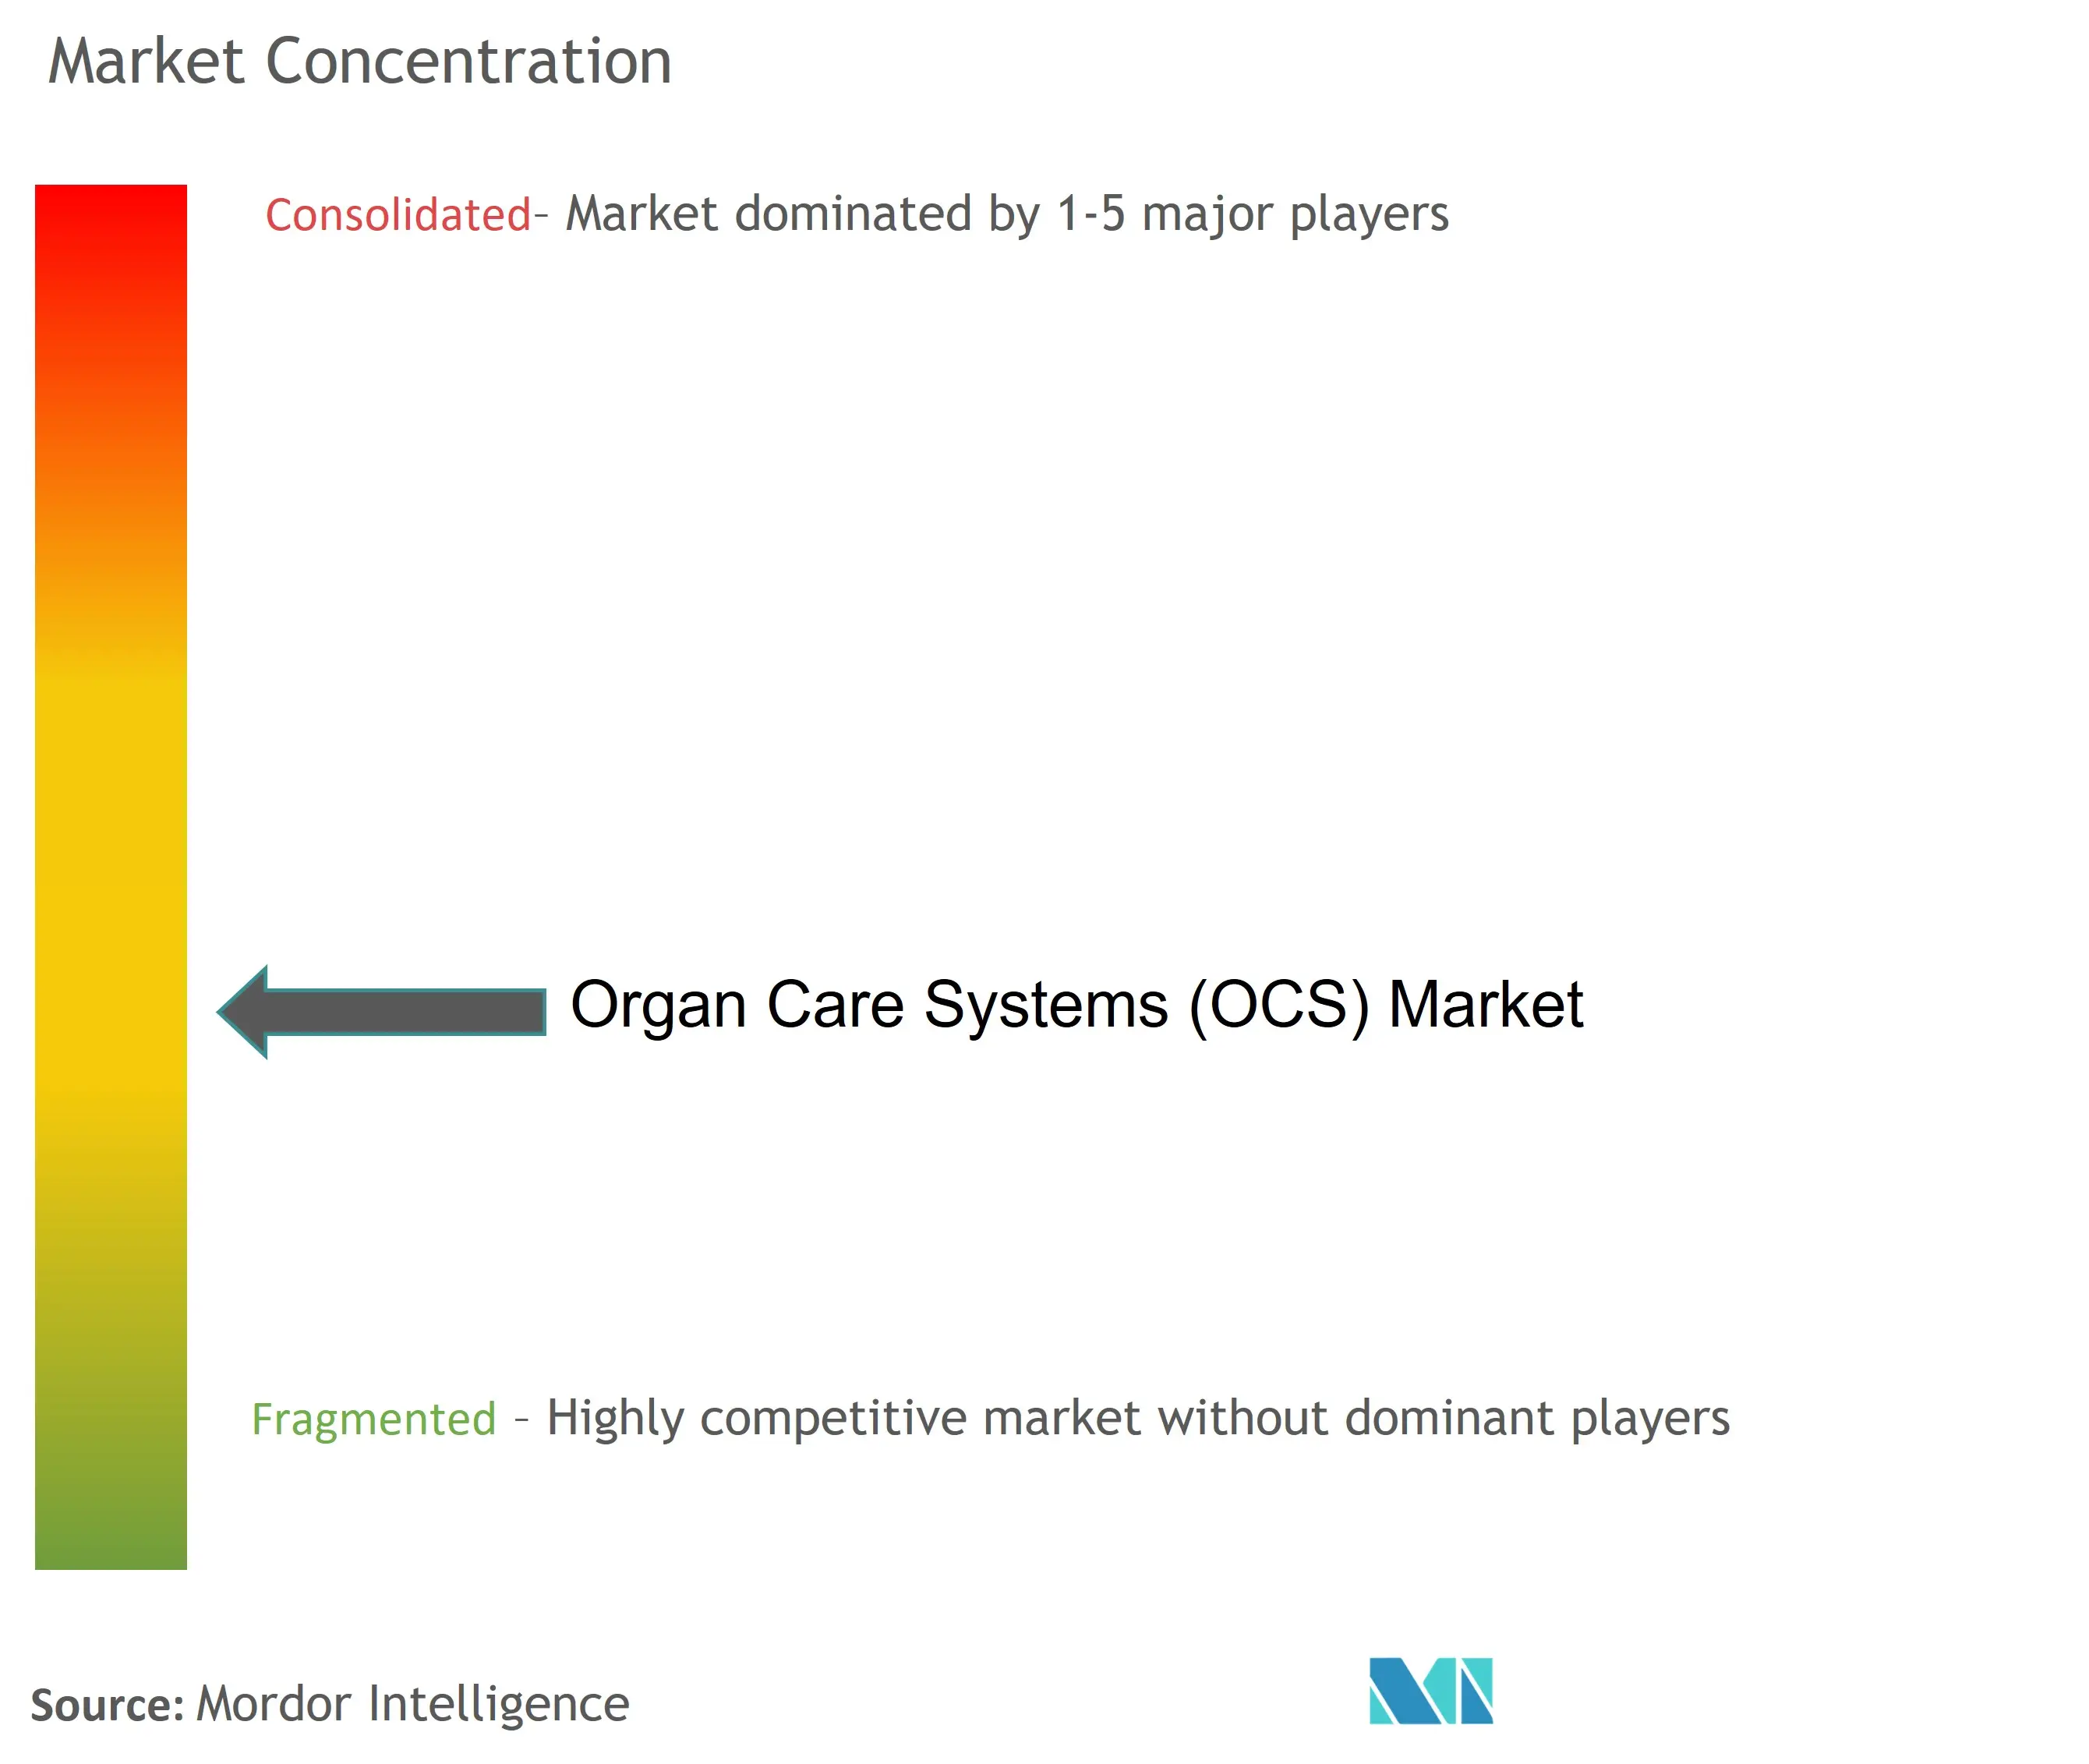 Organ Care Systems (OCS) Market Concentration